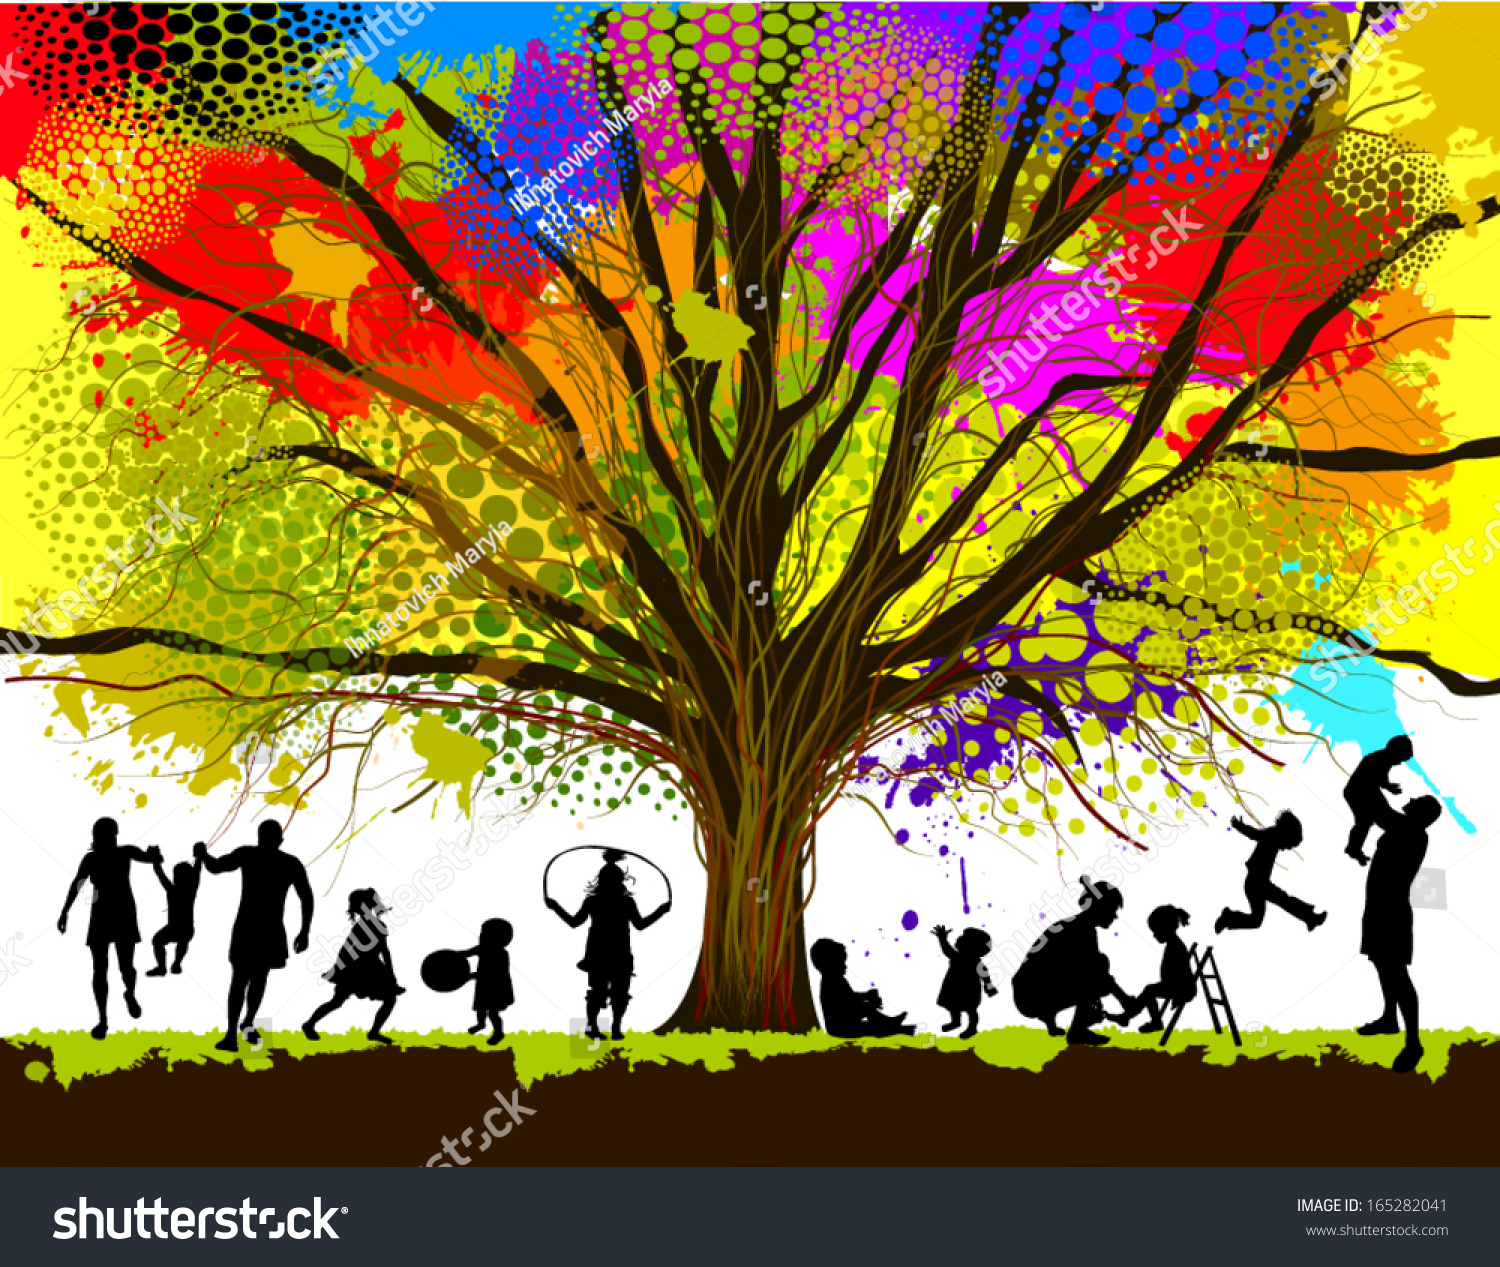 childhood-colorful-tree-vector-165282041-shutterstock